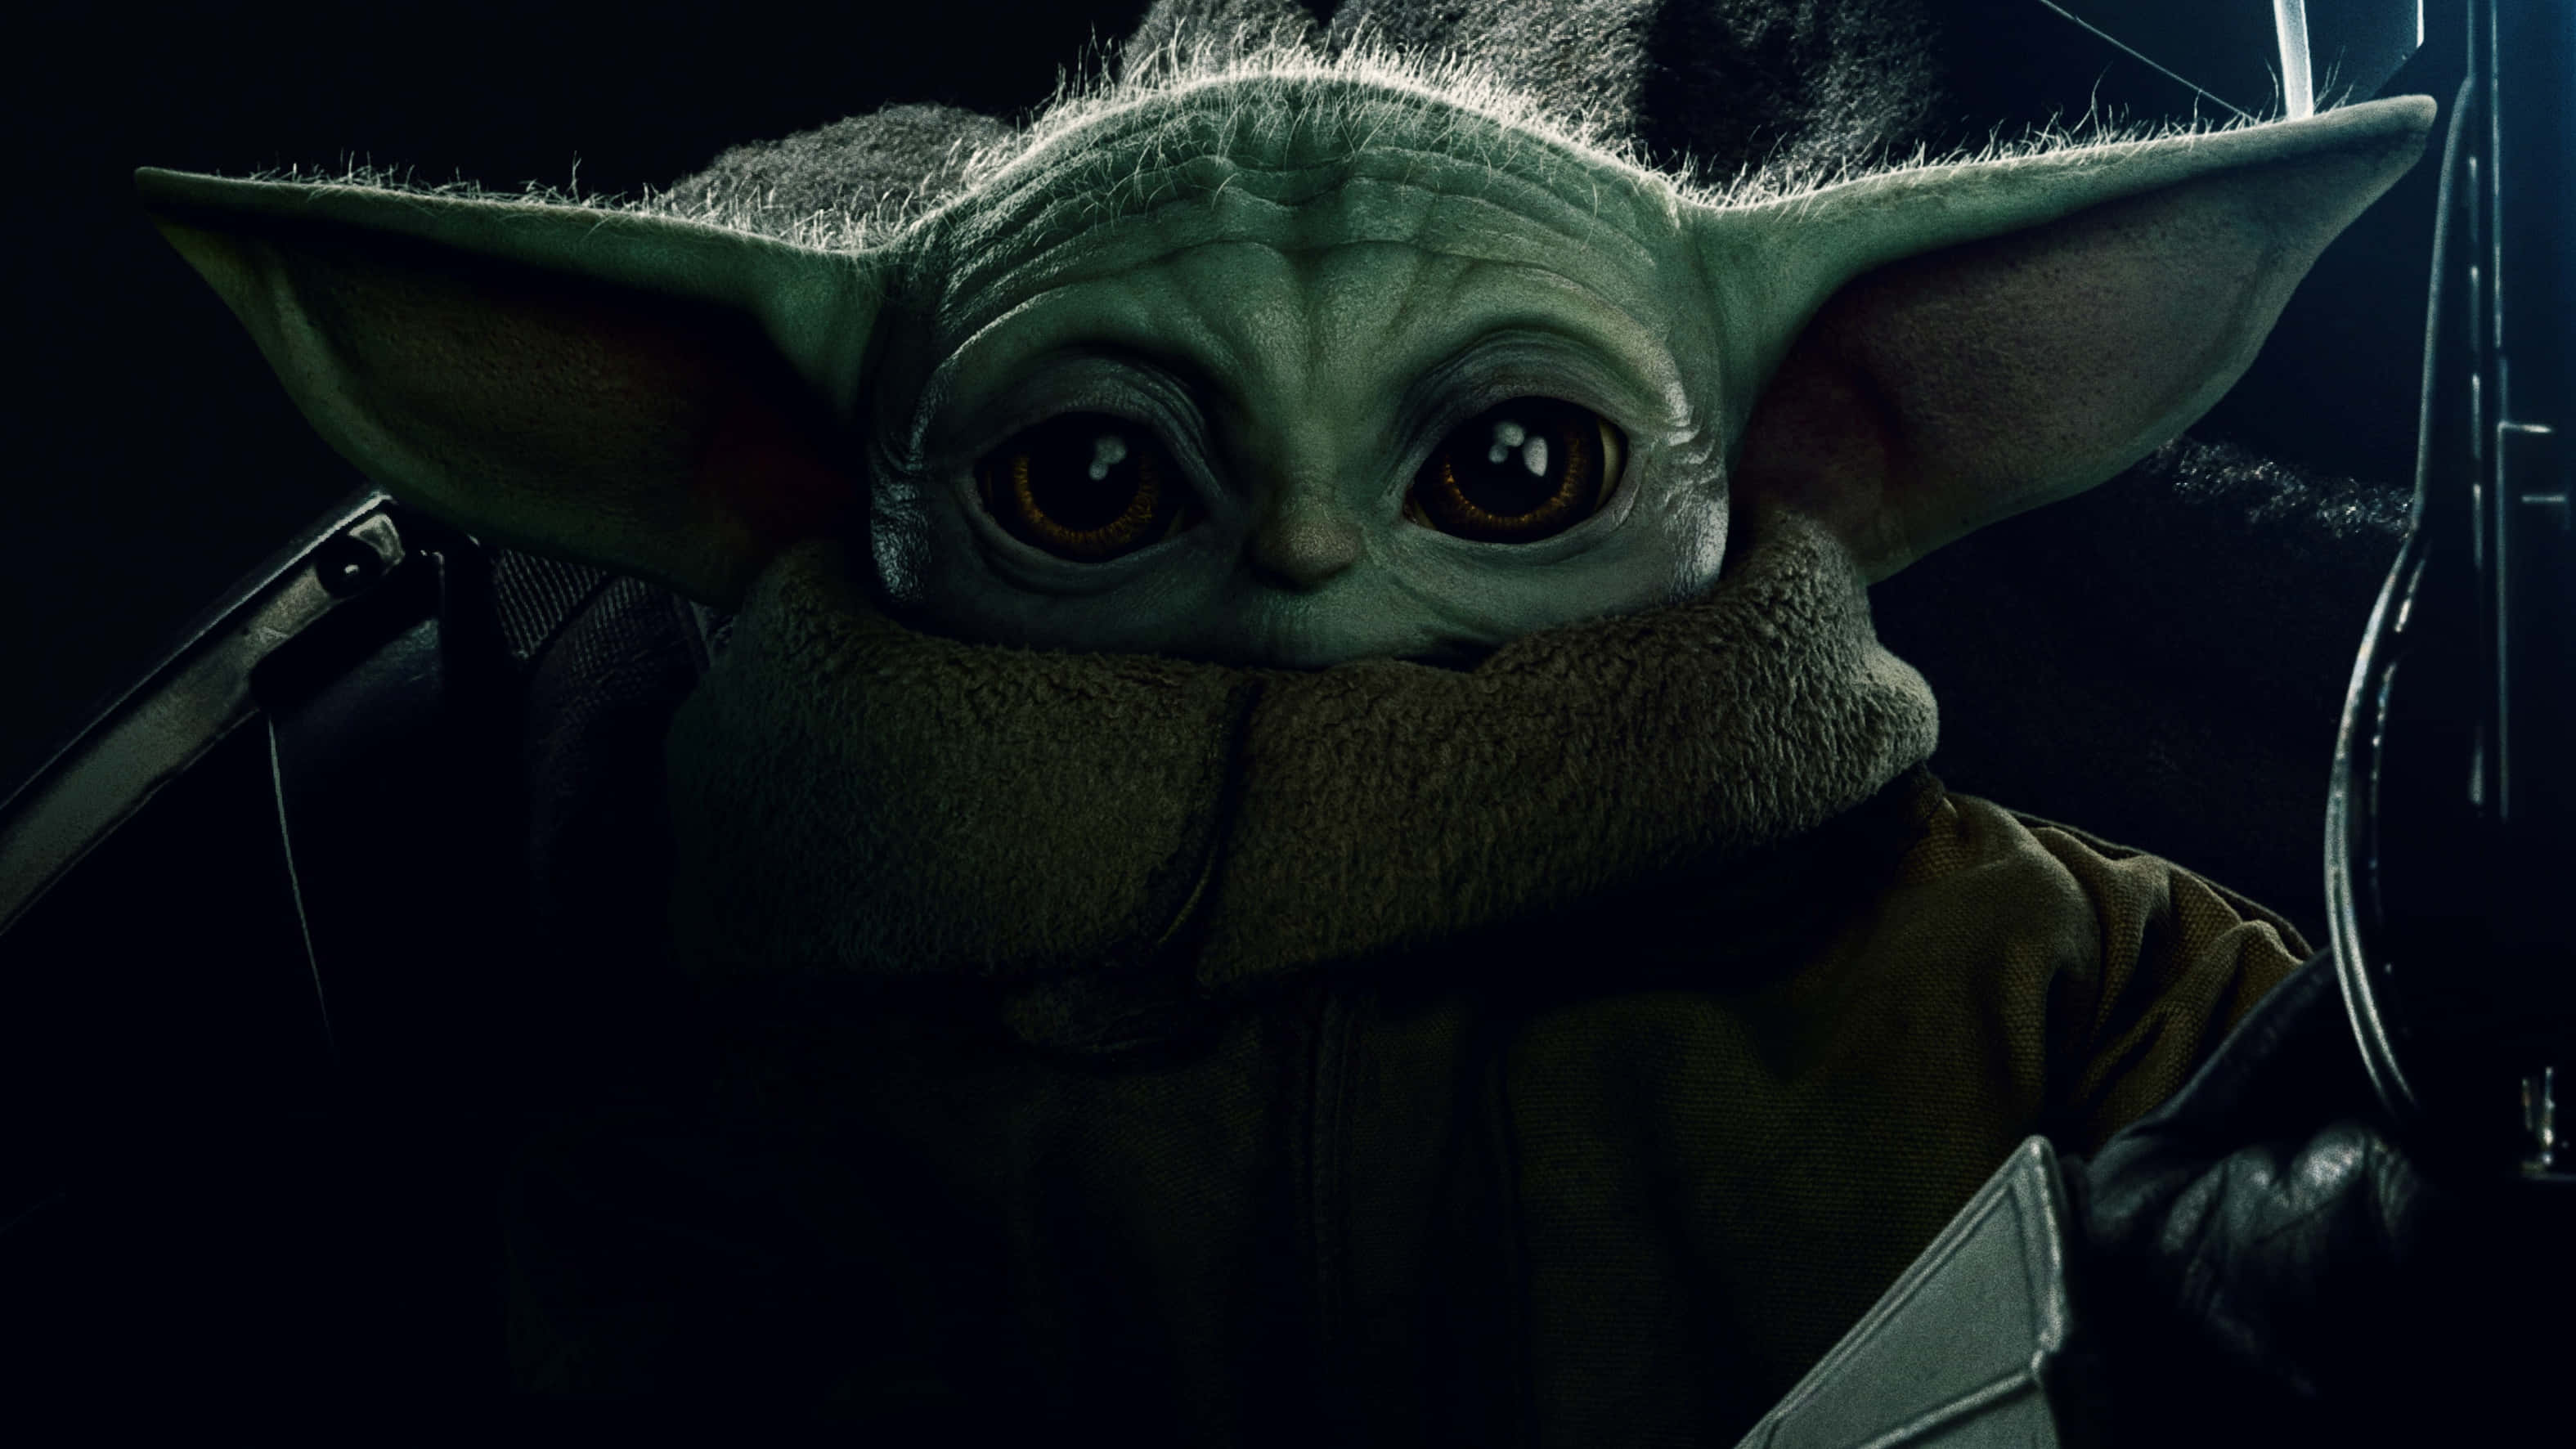 Nature's Finest - Baby Yoda in His Element